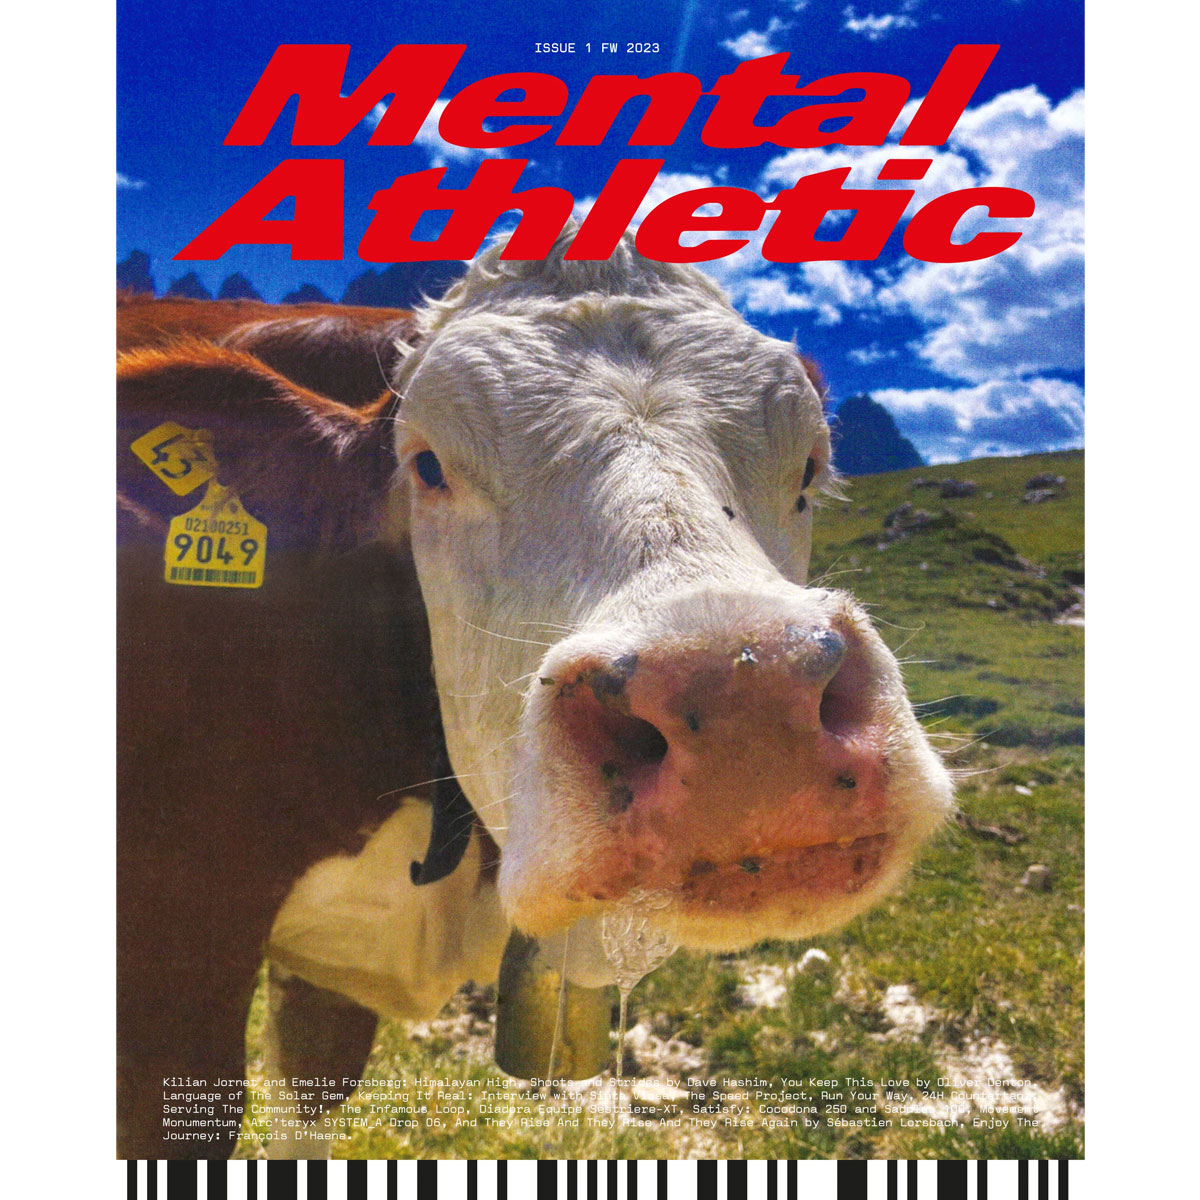 Issue 1 - Cover w/ Cows